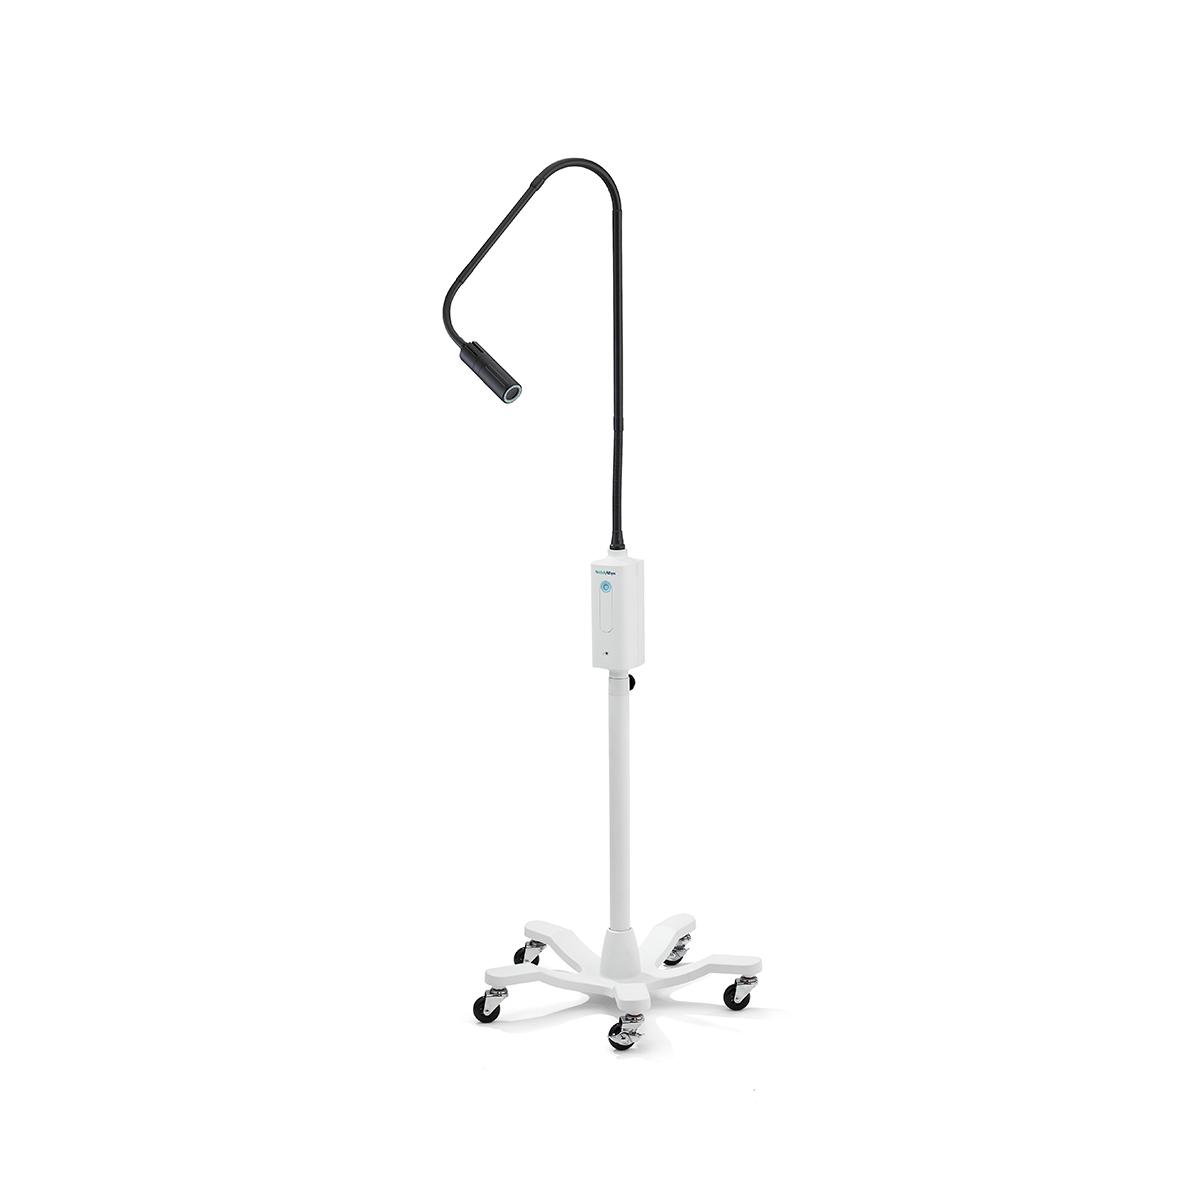 Green Series Veterinary Exam Light IV on mobile stand with wheels